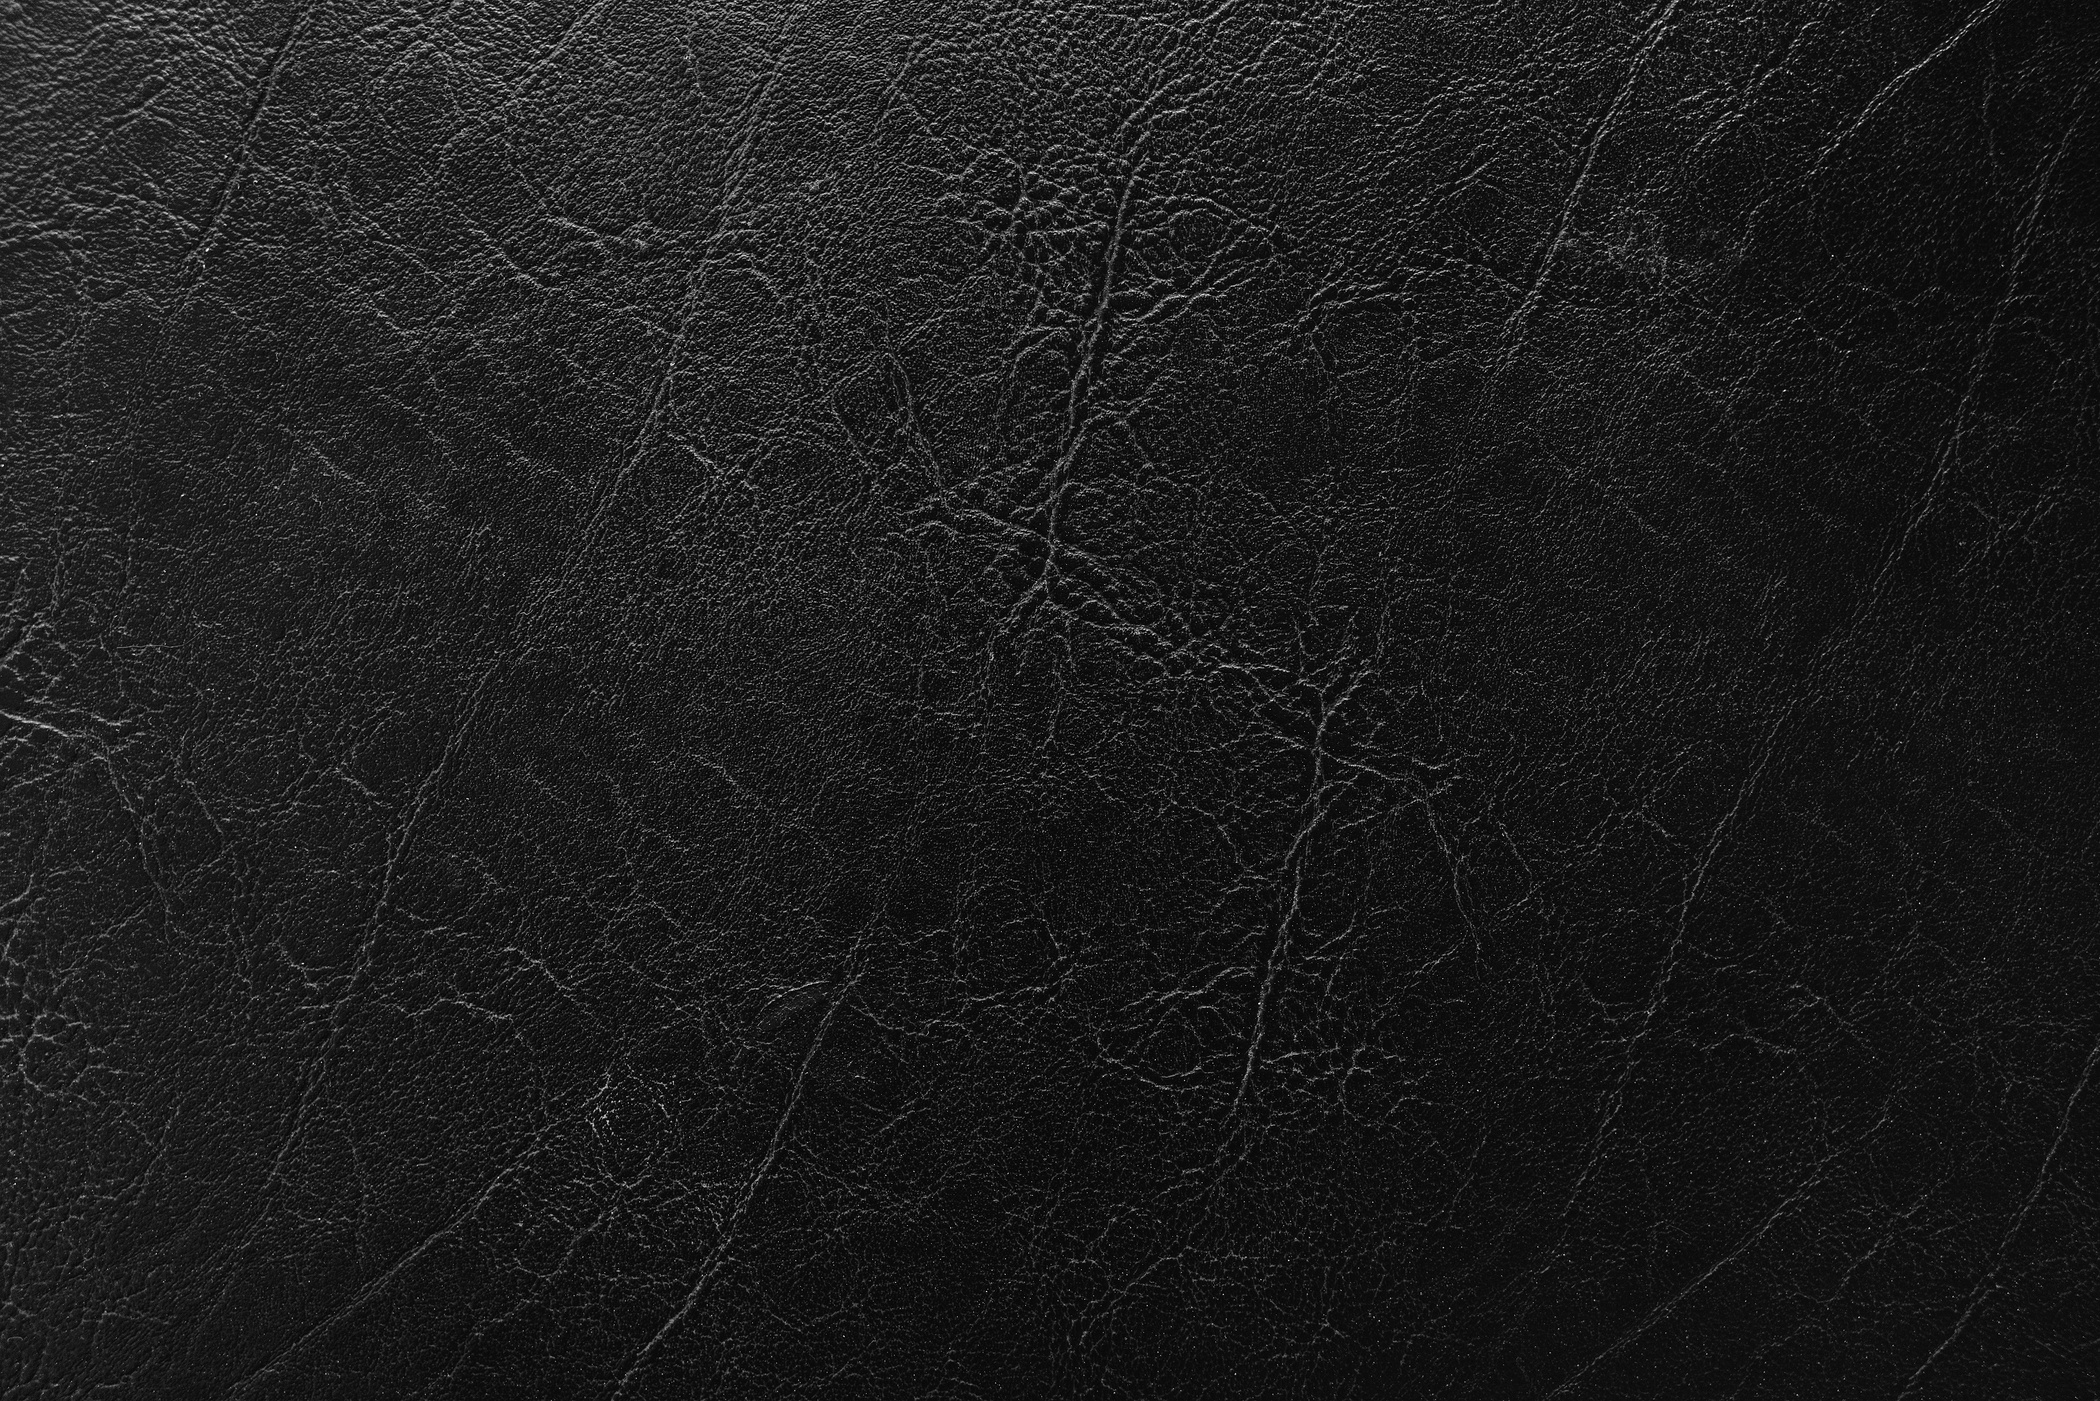 Black Leather Textured Background